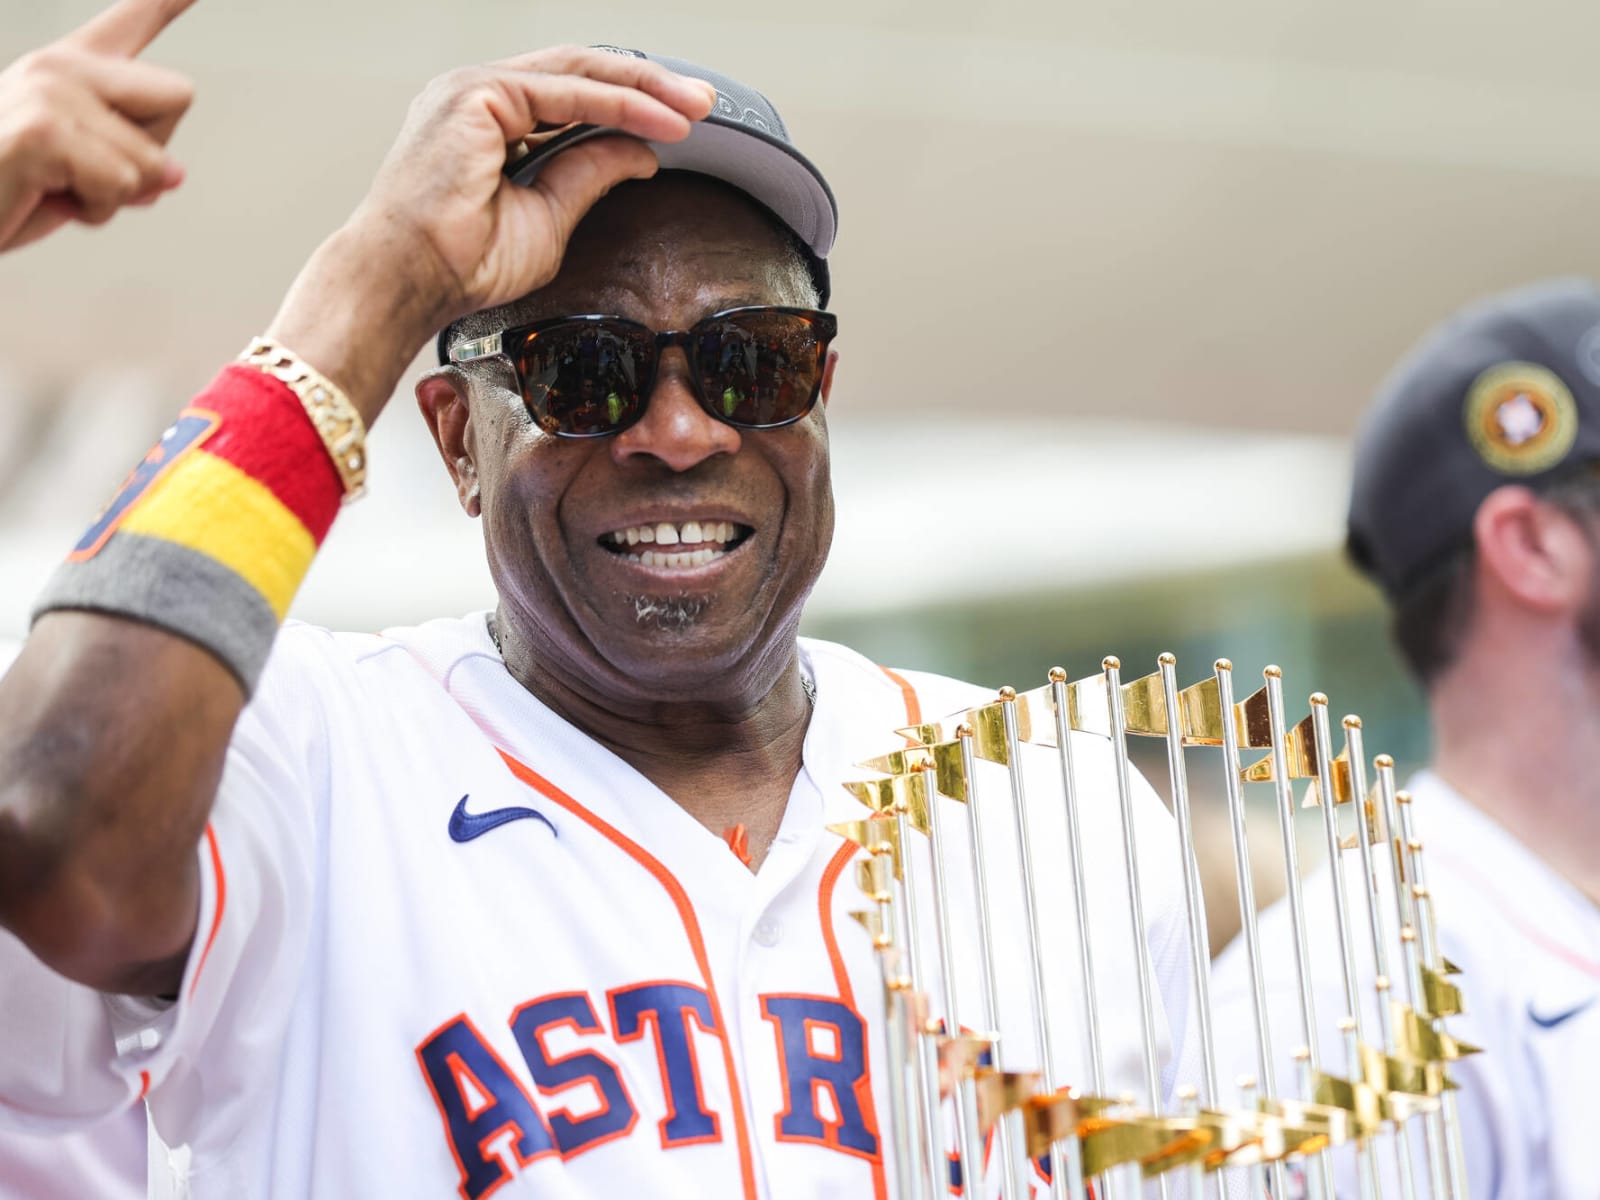 NY Mets: Ross Jones was around during an exciting time in team history